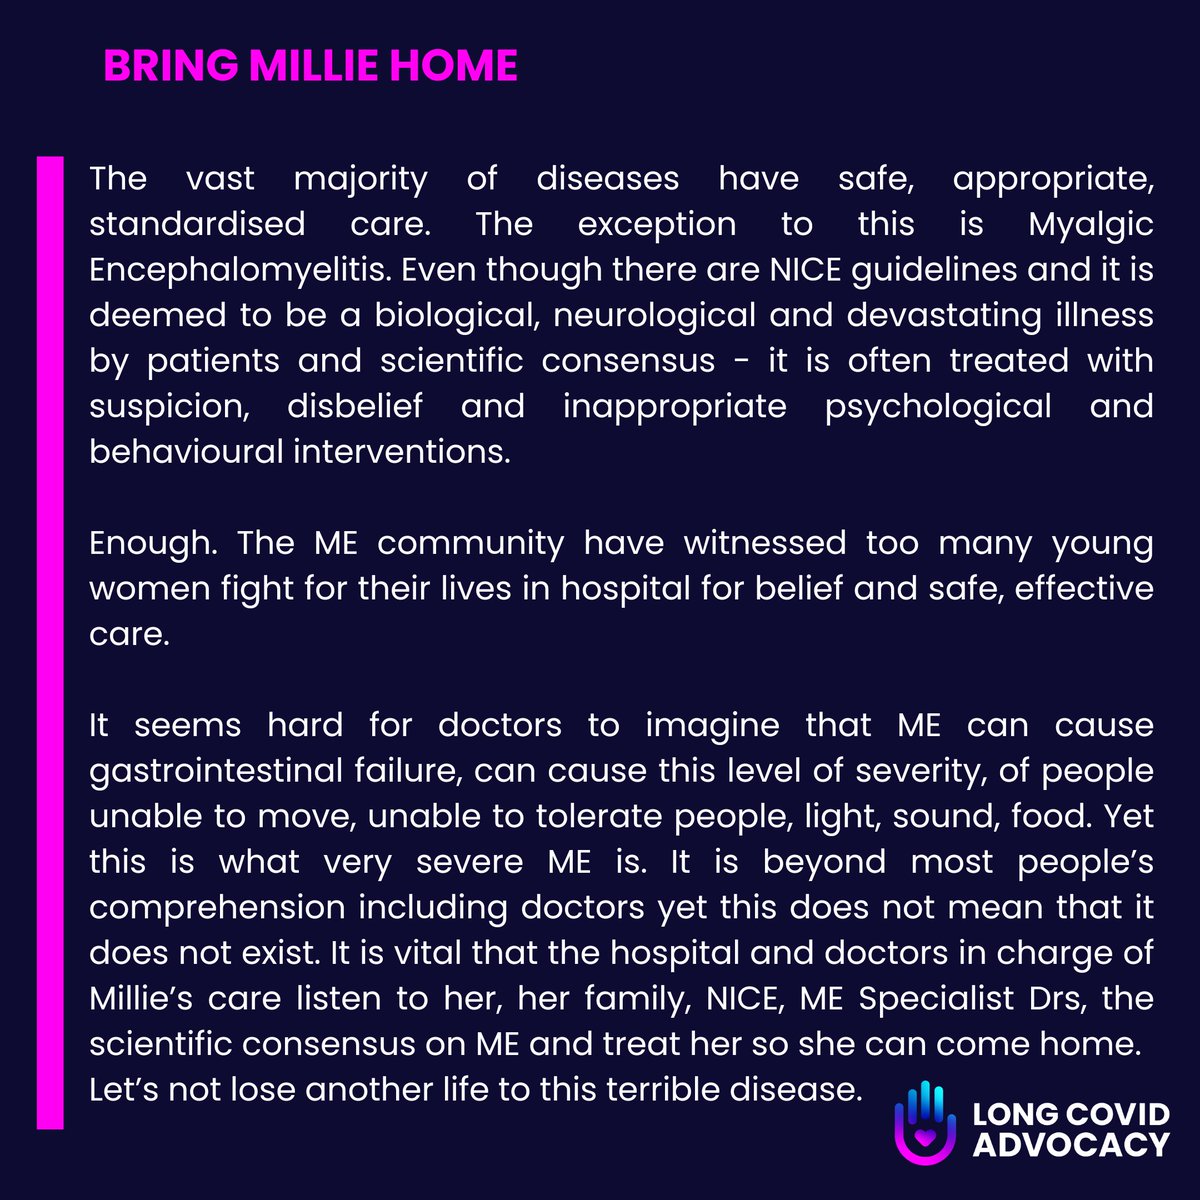 #BringMillieHome
#DontLetMEDie
@gmcuk @RCPhysicians @rcpsych